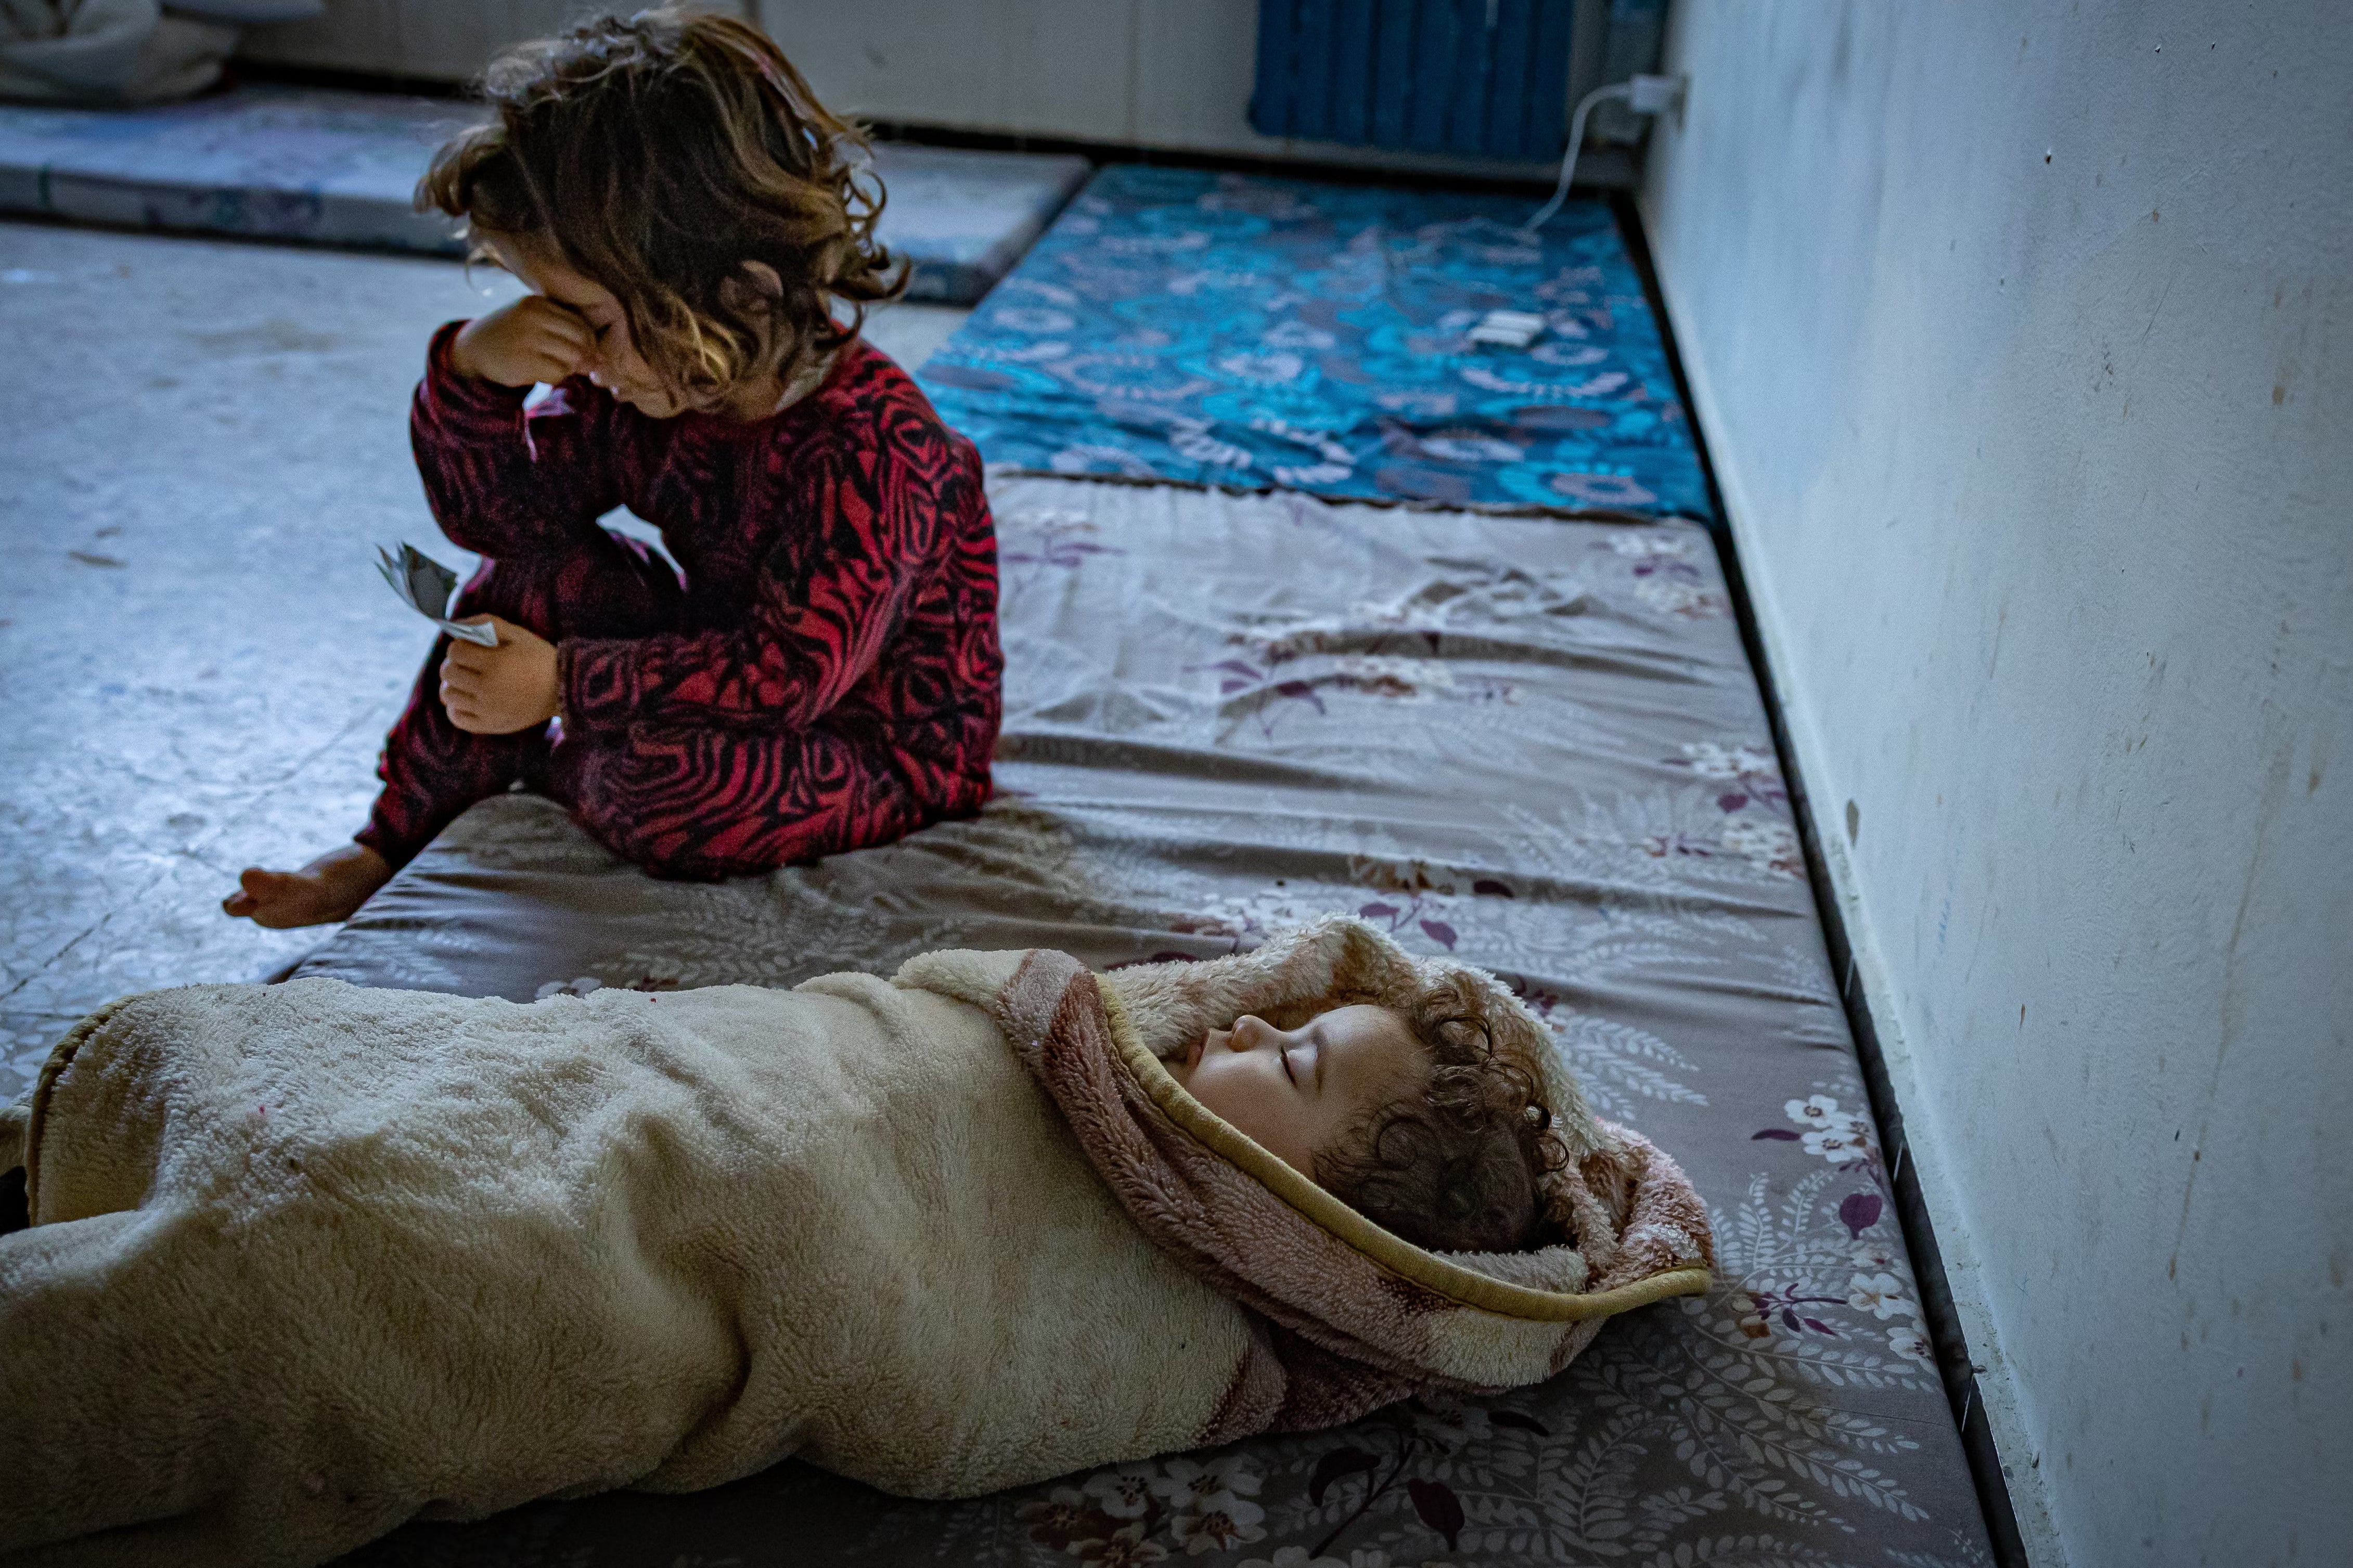 Asmaa’s five-month-old baby swaddled in a blanket, with another of her children at a school in Tyre. The family is among those who have had to flee the clashes at the Lebanon-Israeli border